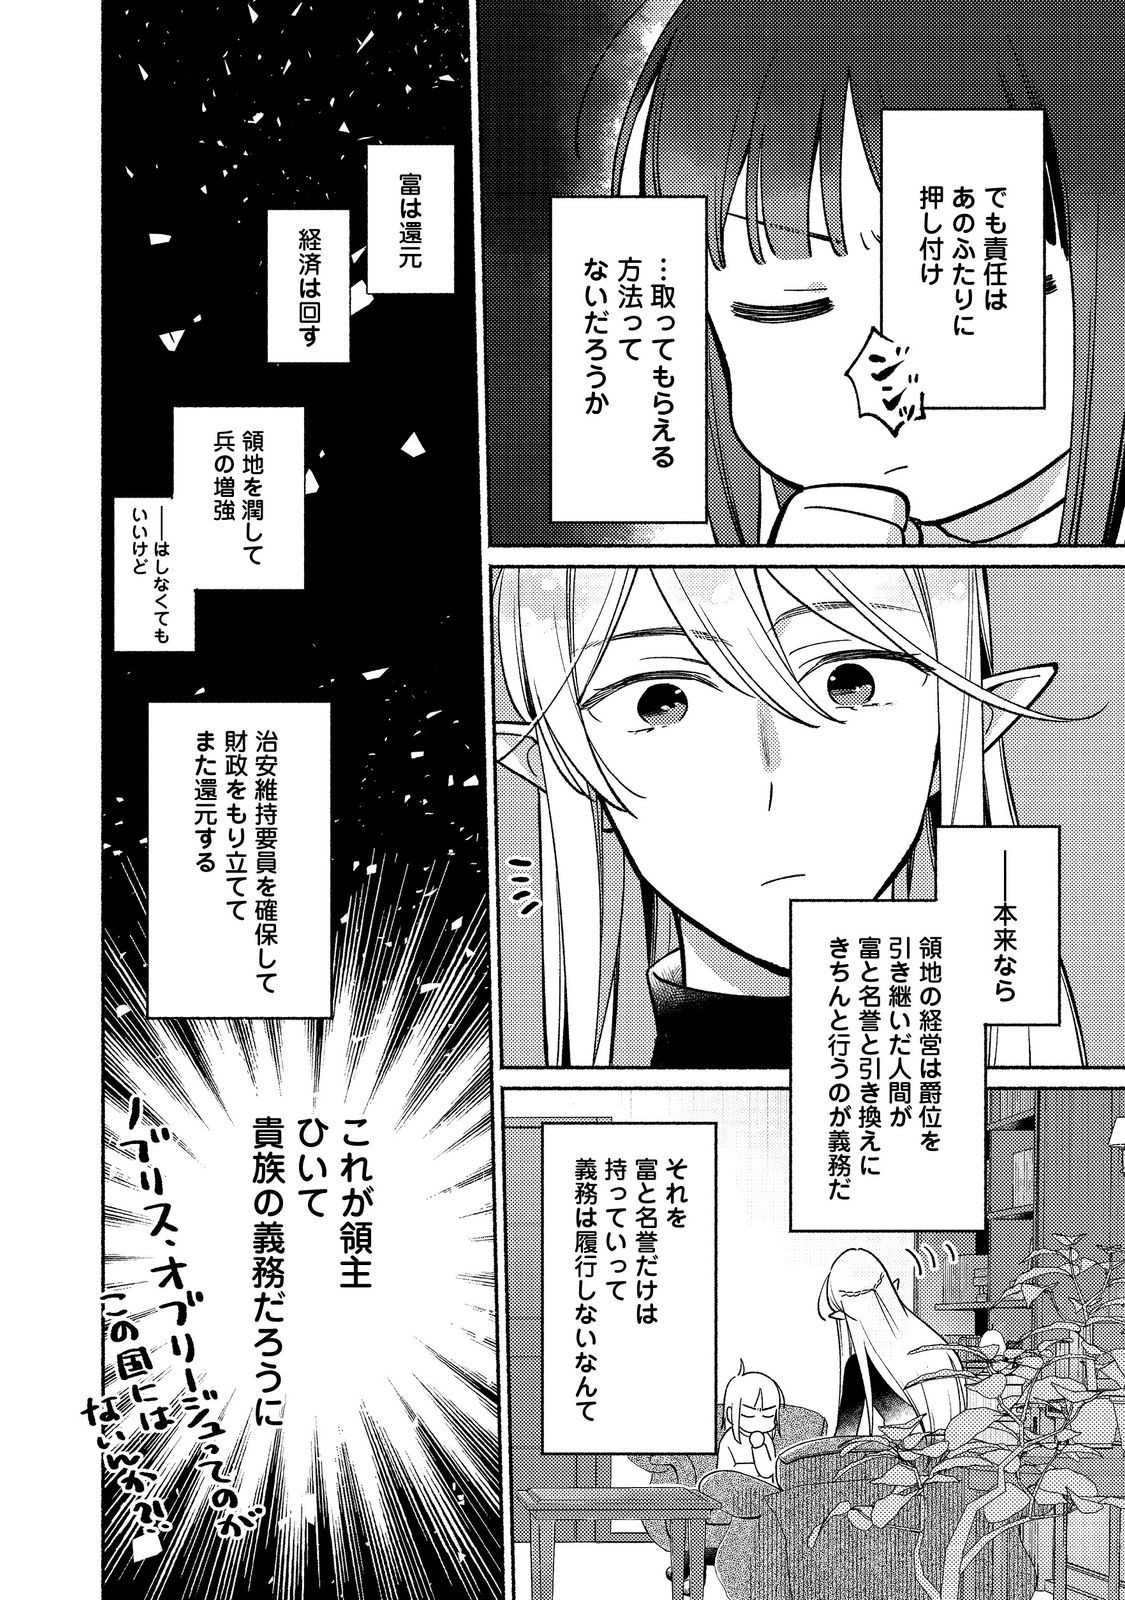 I’m the White Pig Nobleman 第24.2話 - Page 14